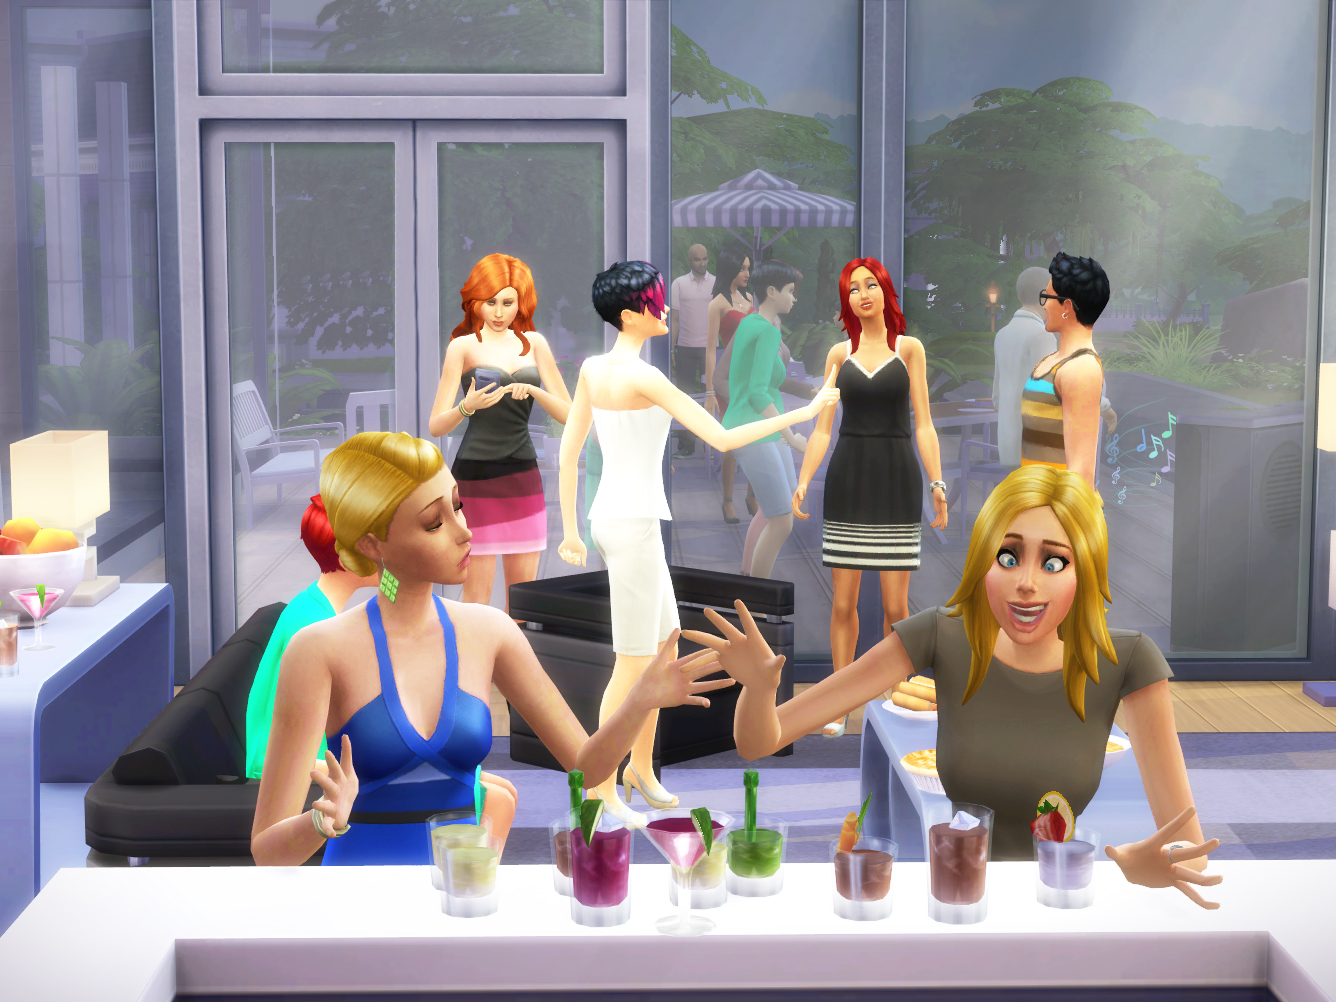 sims 4 house party mod